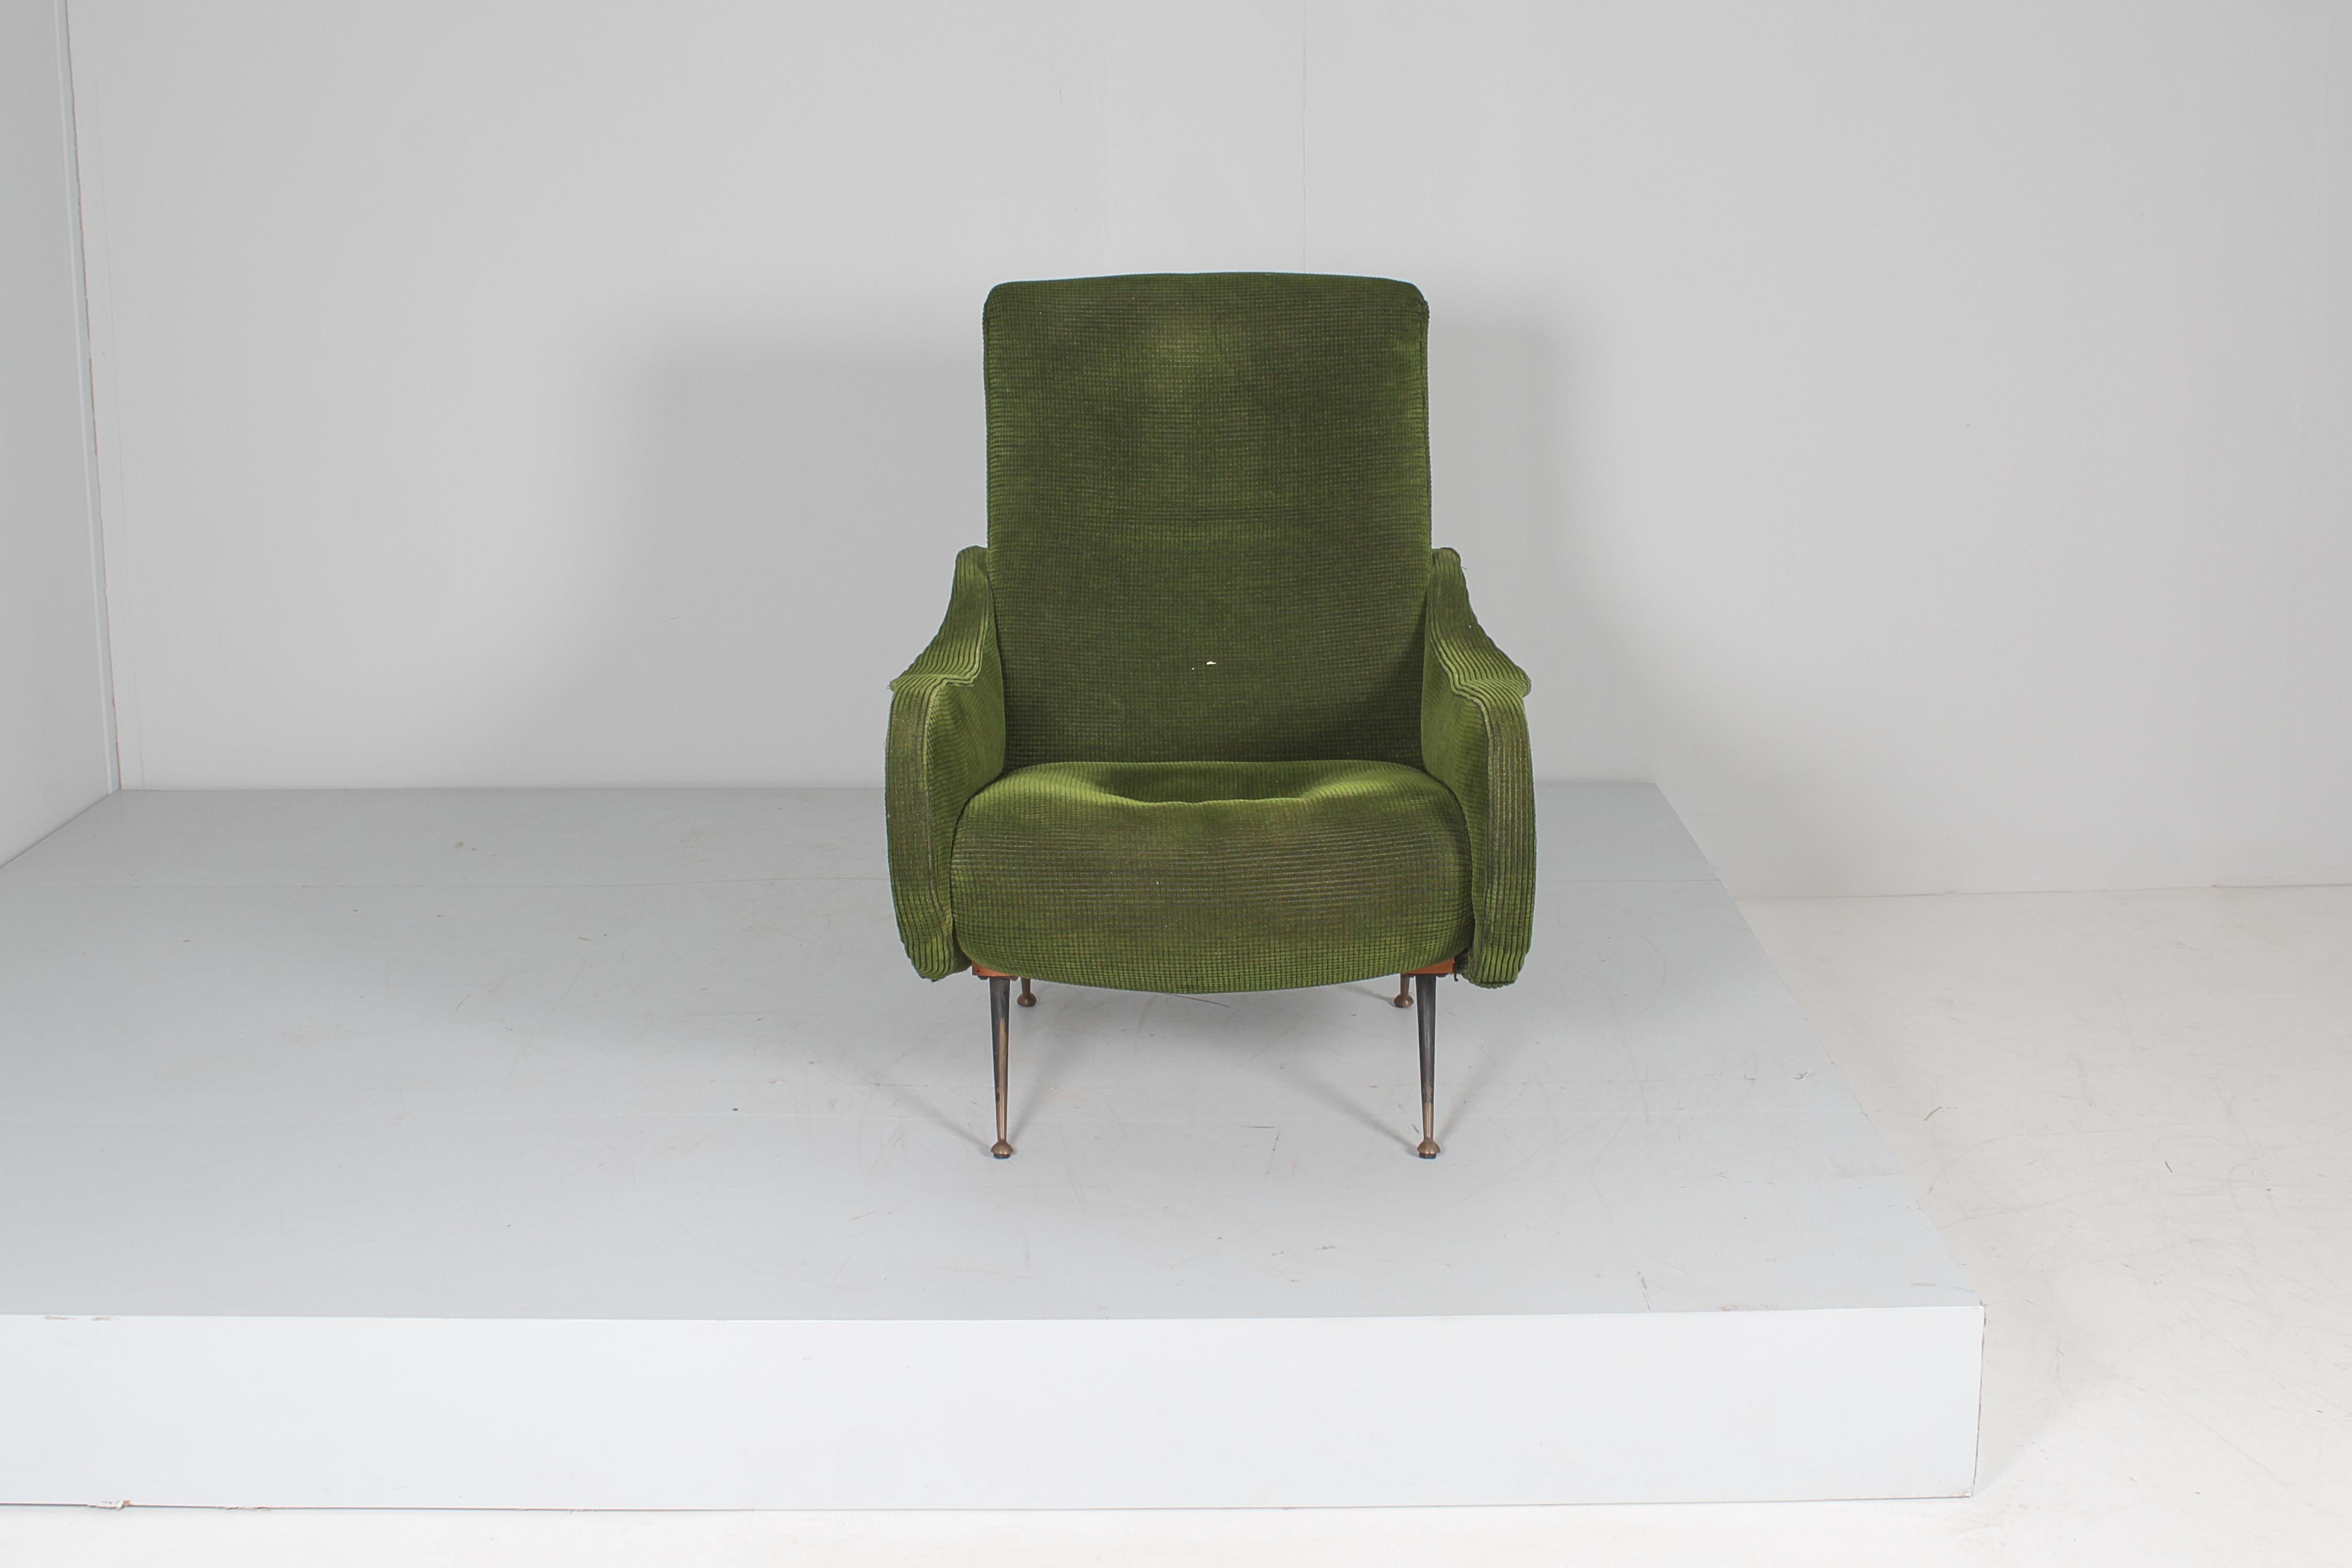 Very delicious armchair with wooden structure covered in green velvet, with dark metal feet and brass tips. Italian production in the style of the 